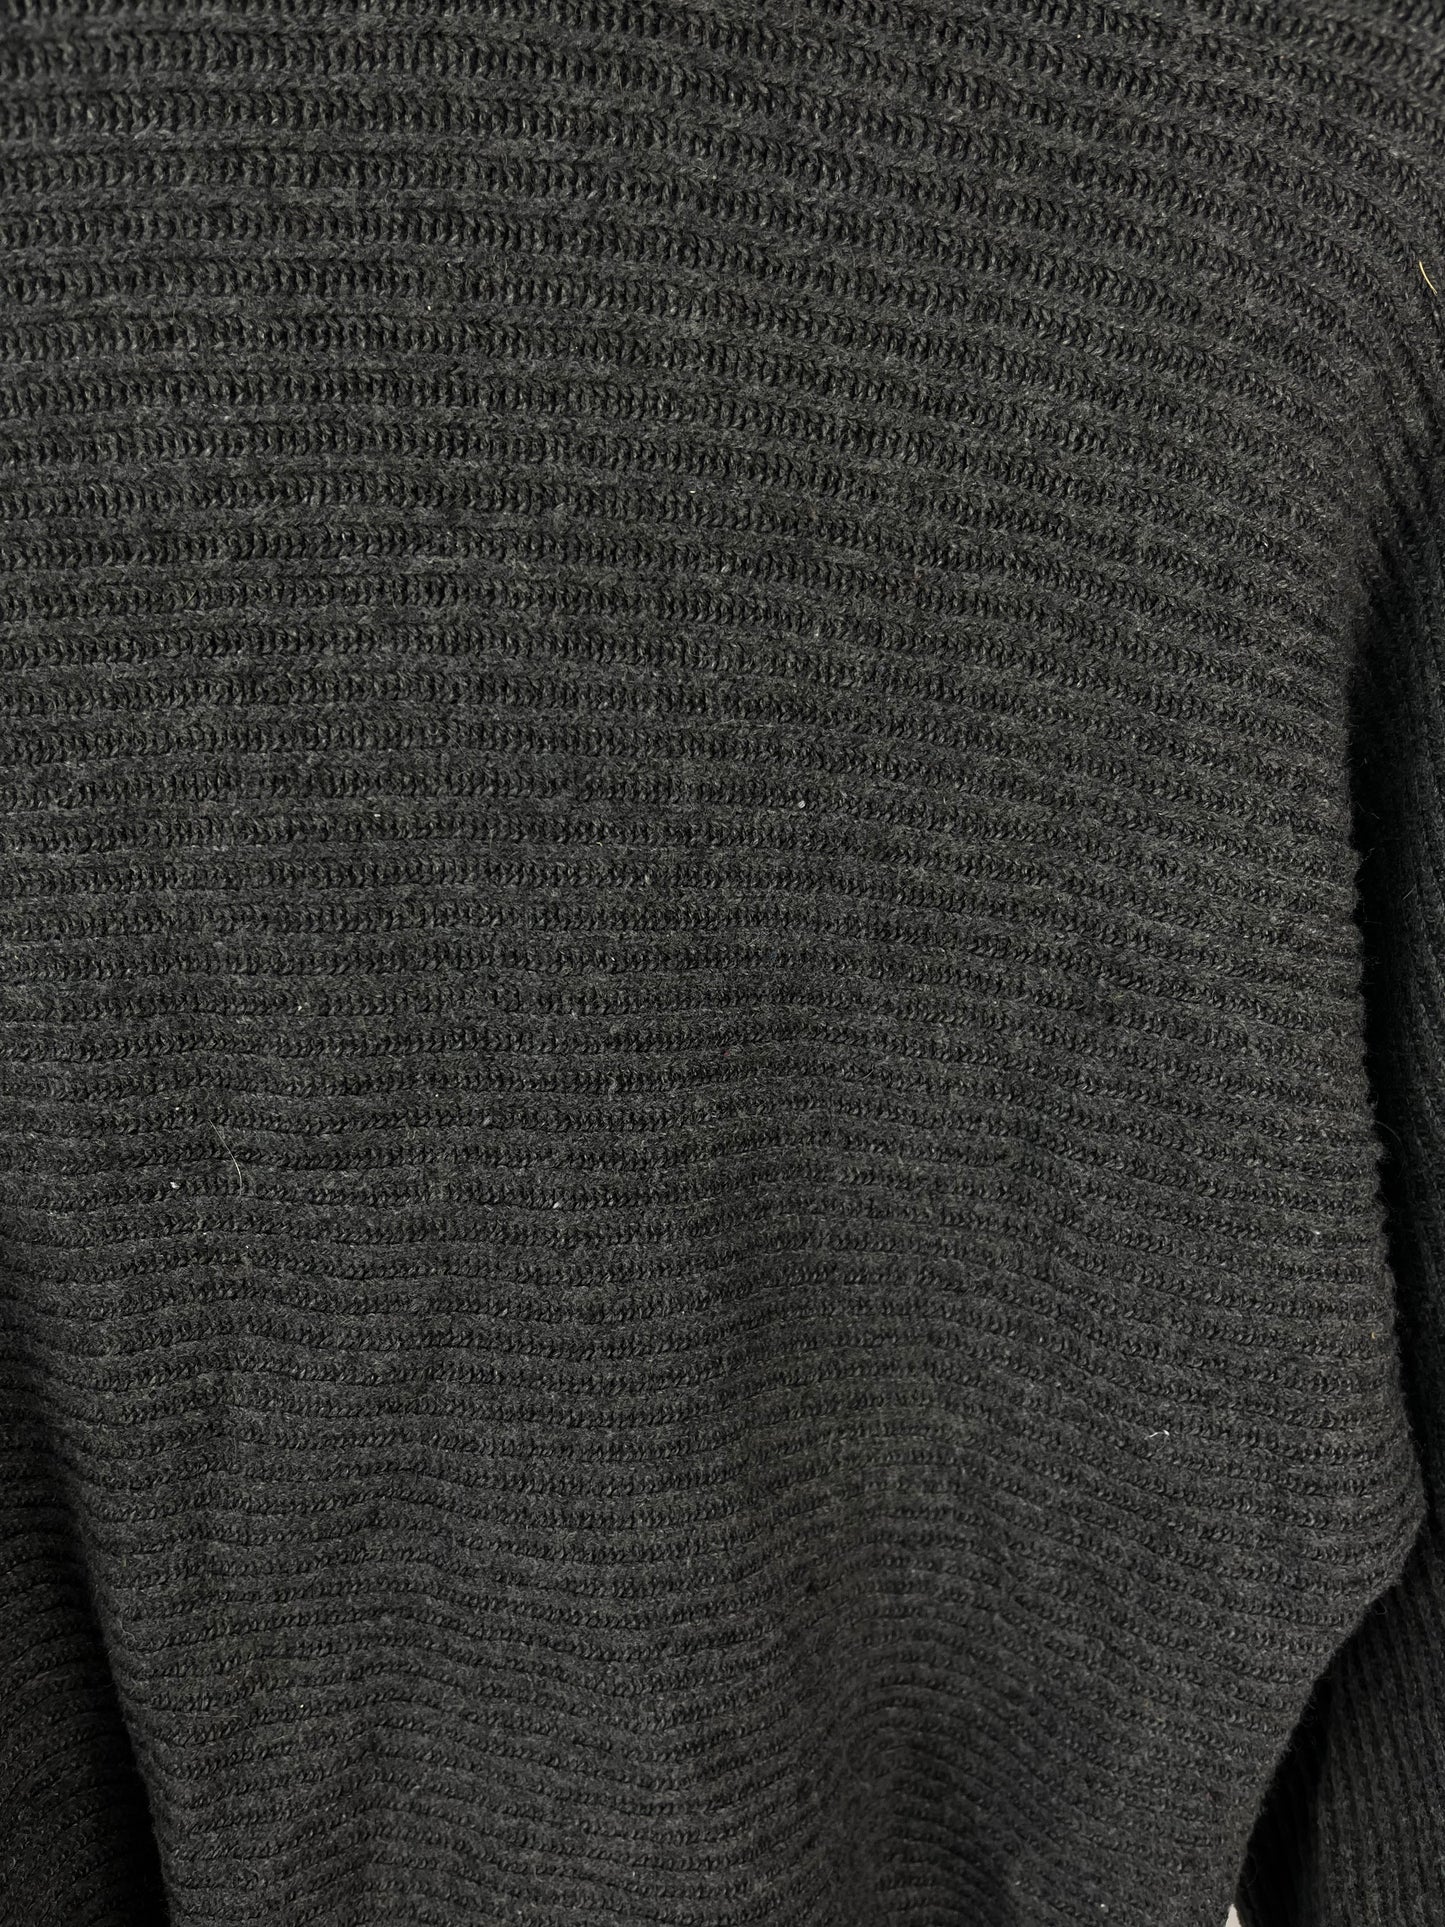 Load image into Gallery viewer, VTG Knit Grey Turtleneck Sweater Sz M
